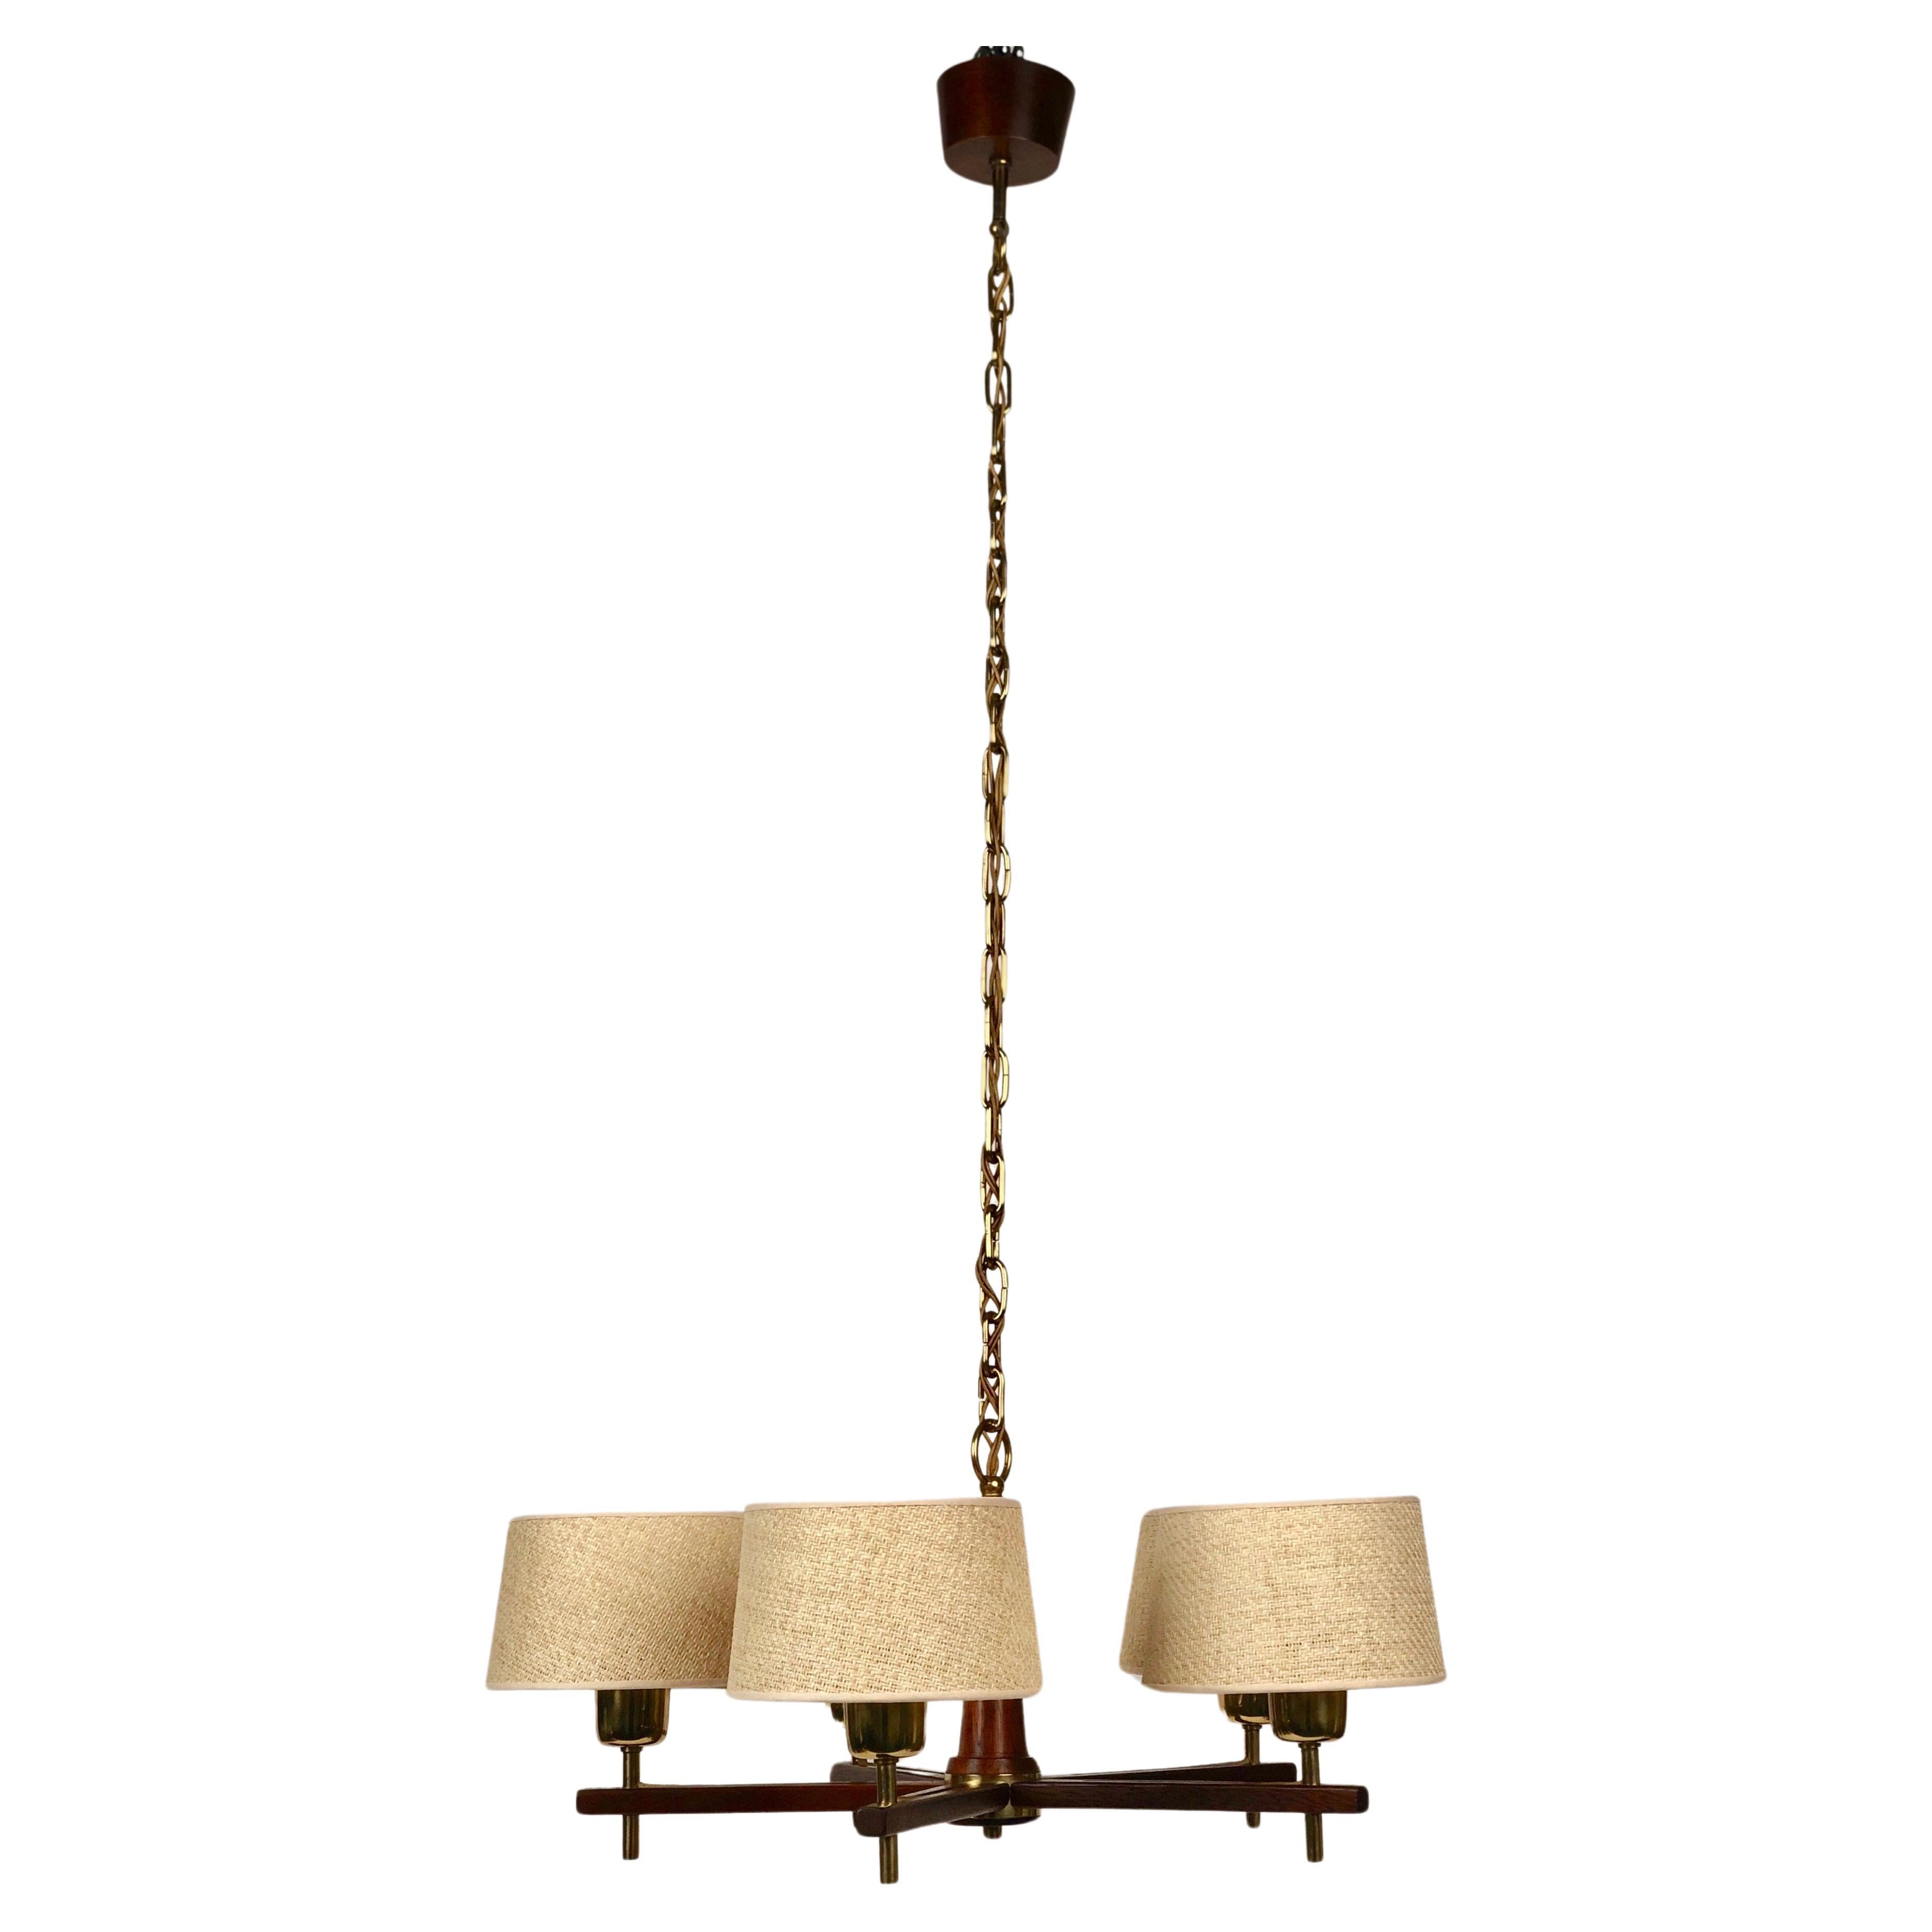 Five Arms Chandelier in Teak Wood and Brass with Cane Shades, 1960, Austria